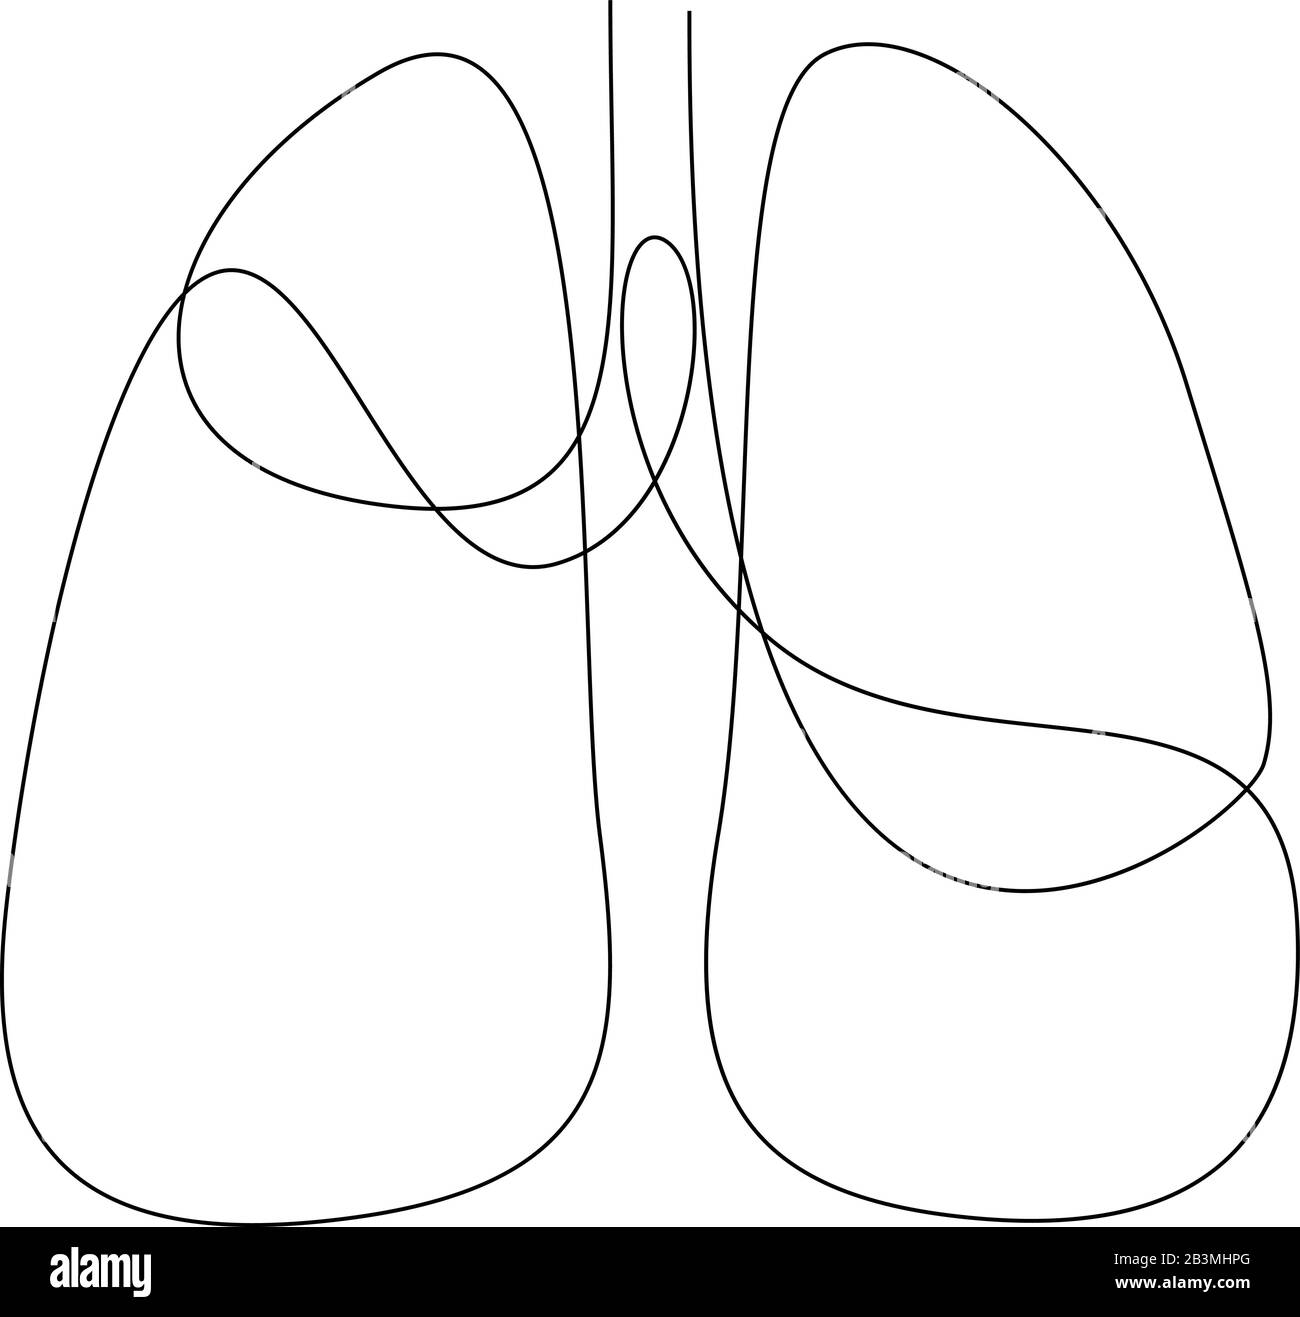 Single continuous line art anatomical human lungs silhouette. Healthy medicine against smoking concept design world no tobacco day tuberculosis one sk Stock Vector